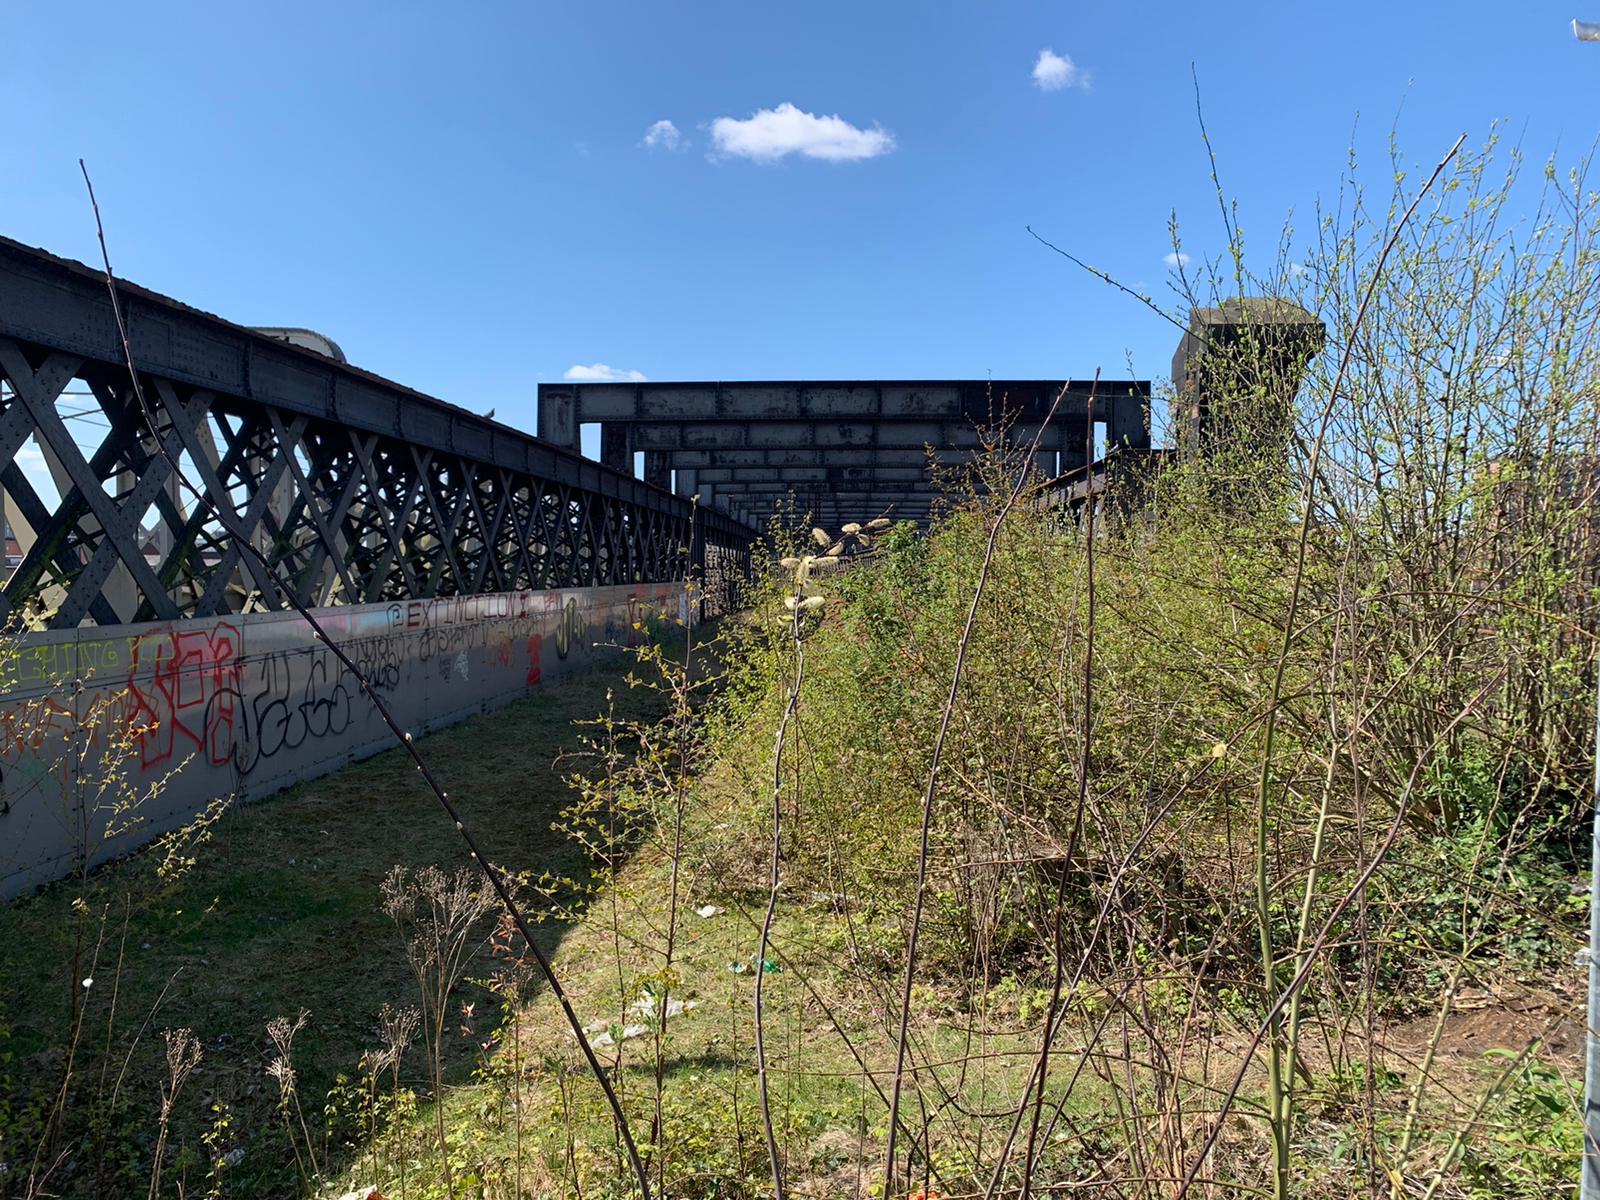 Andy Burnham, Marcus Johns, and Manchester Labour are proposing in their manifesto to create a new urban park in Castlefield using the unused Castlefield Viaduct